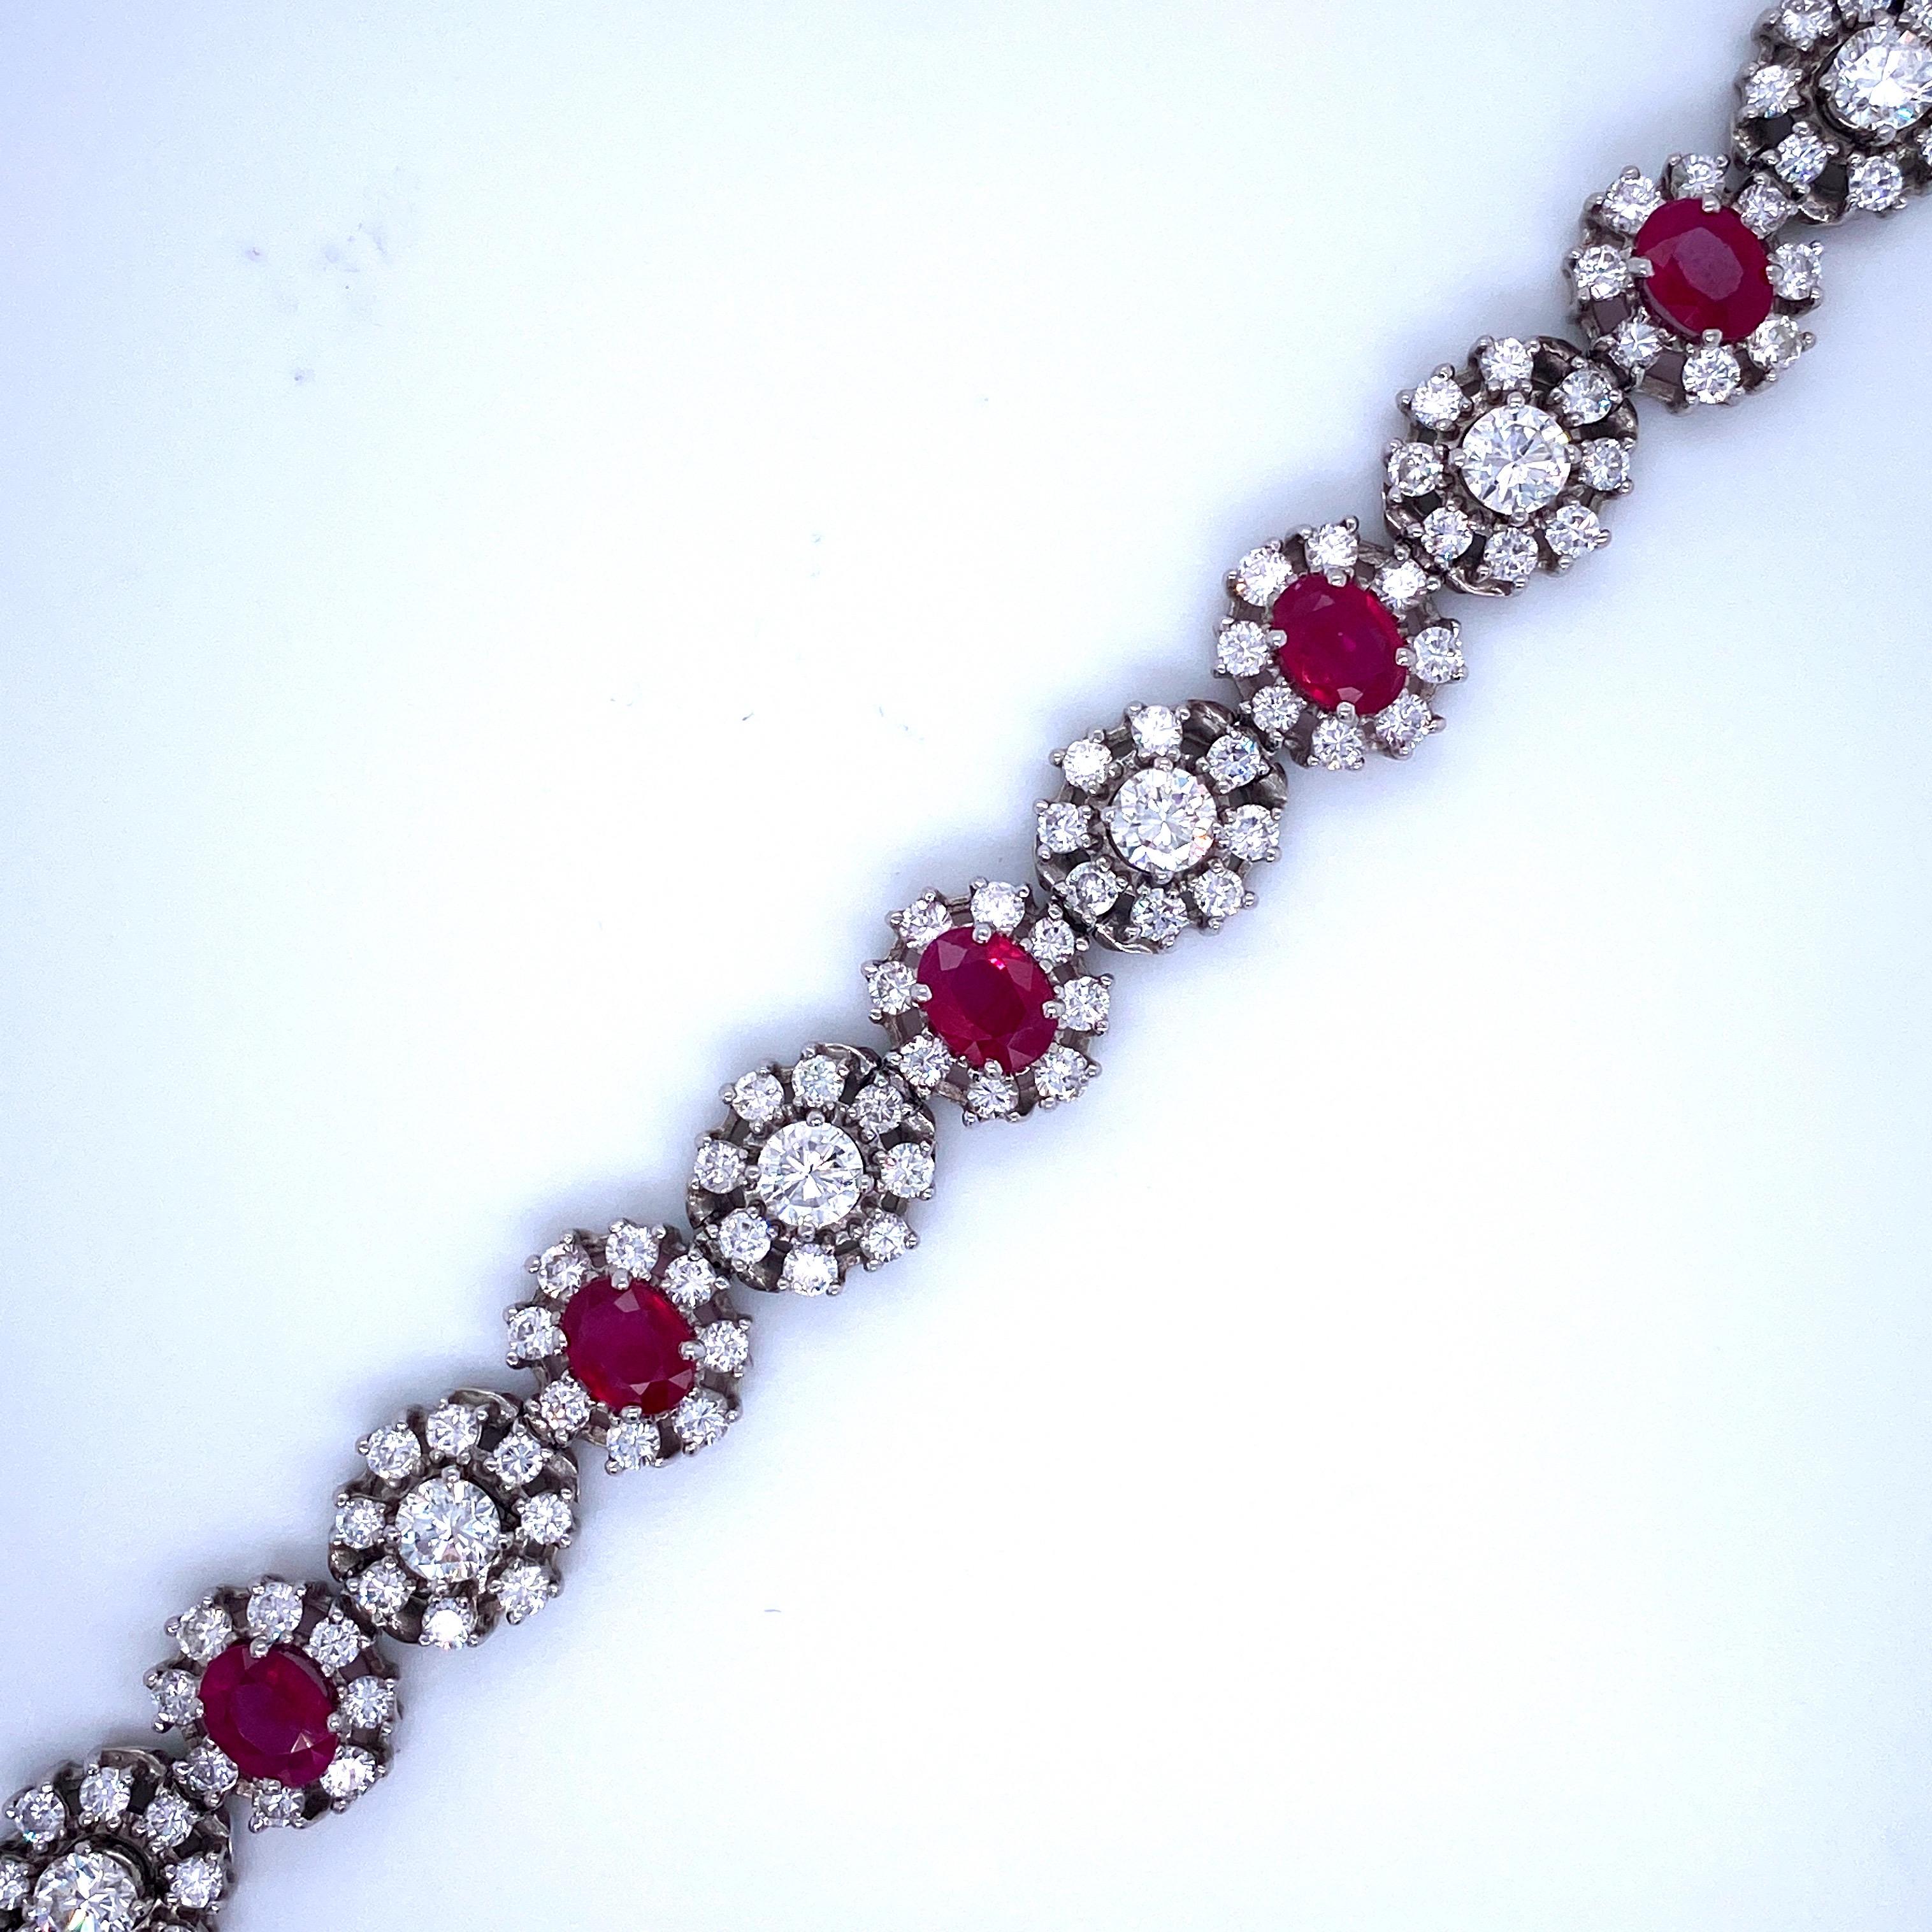 Platinum cluster motif bracelet featuring alternating oval cut rubies and round brilliant diamonds surrounded by diamond halos. 
Ruby- 5.2 * 7.14 mm
Ruby Carat Weight: Approximately 8 Carats
Diamonds Carat Weight: Approximately 10 Carats 
Color